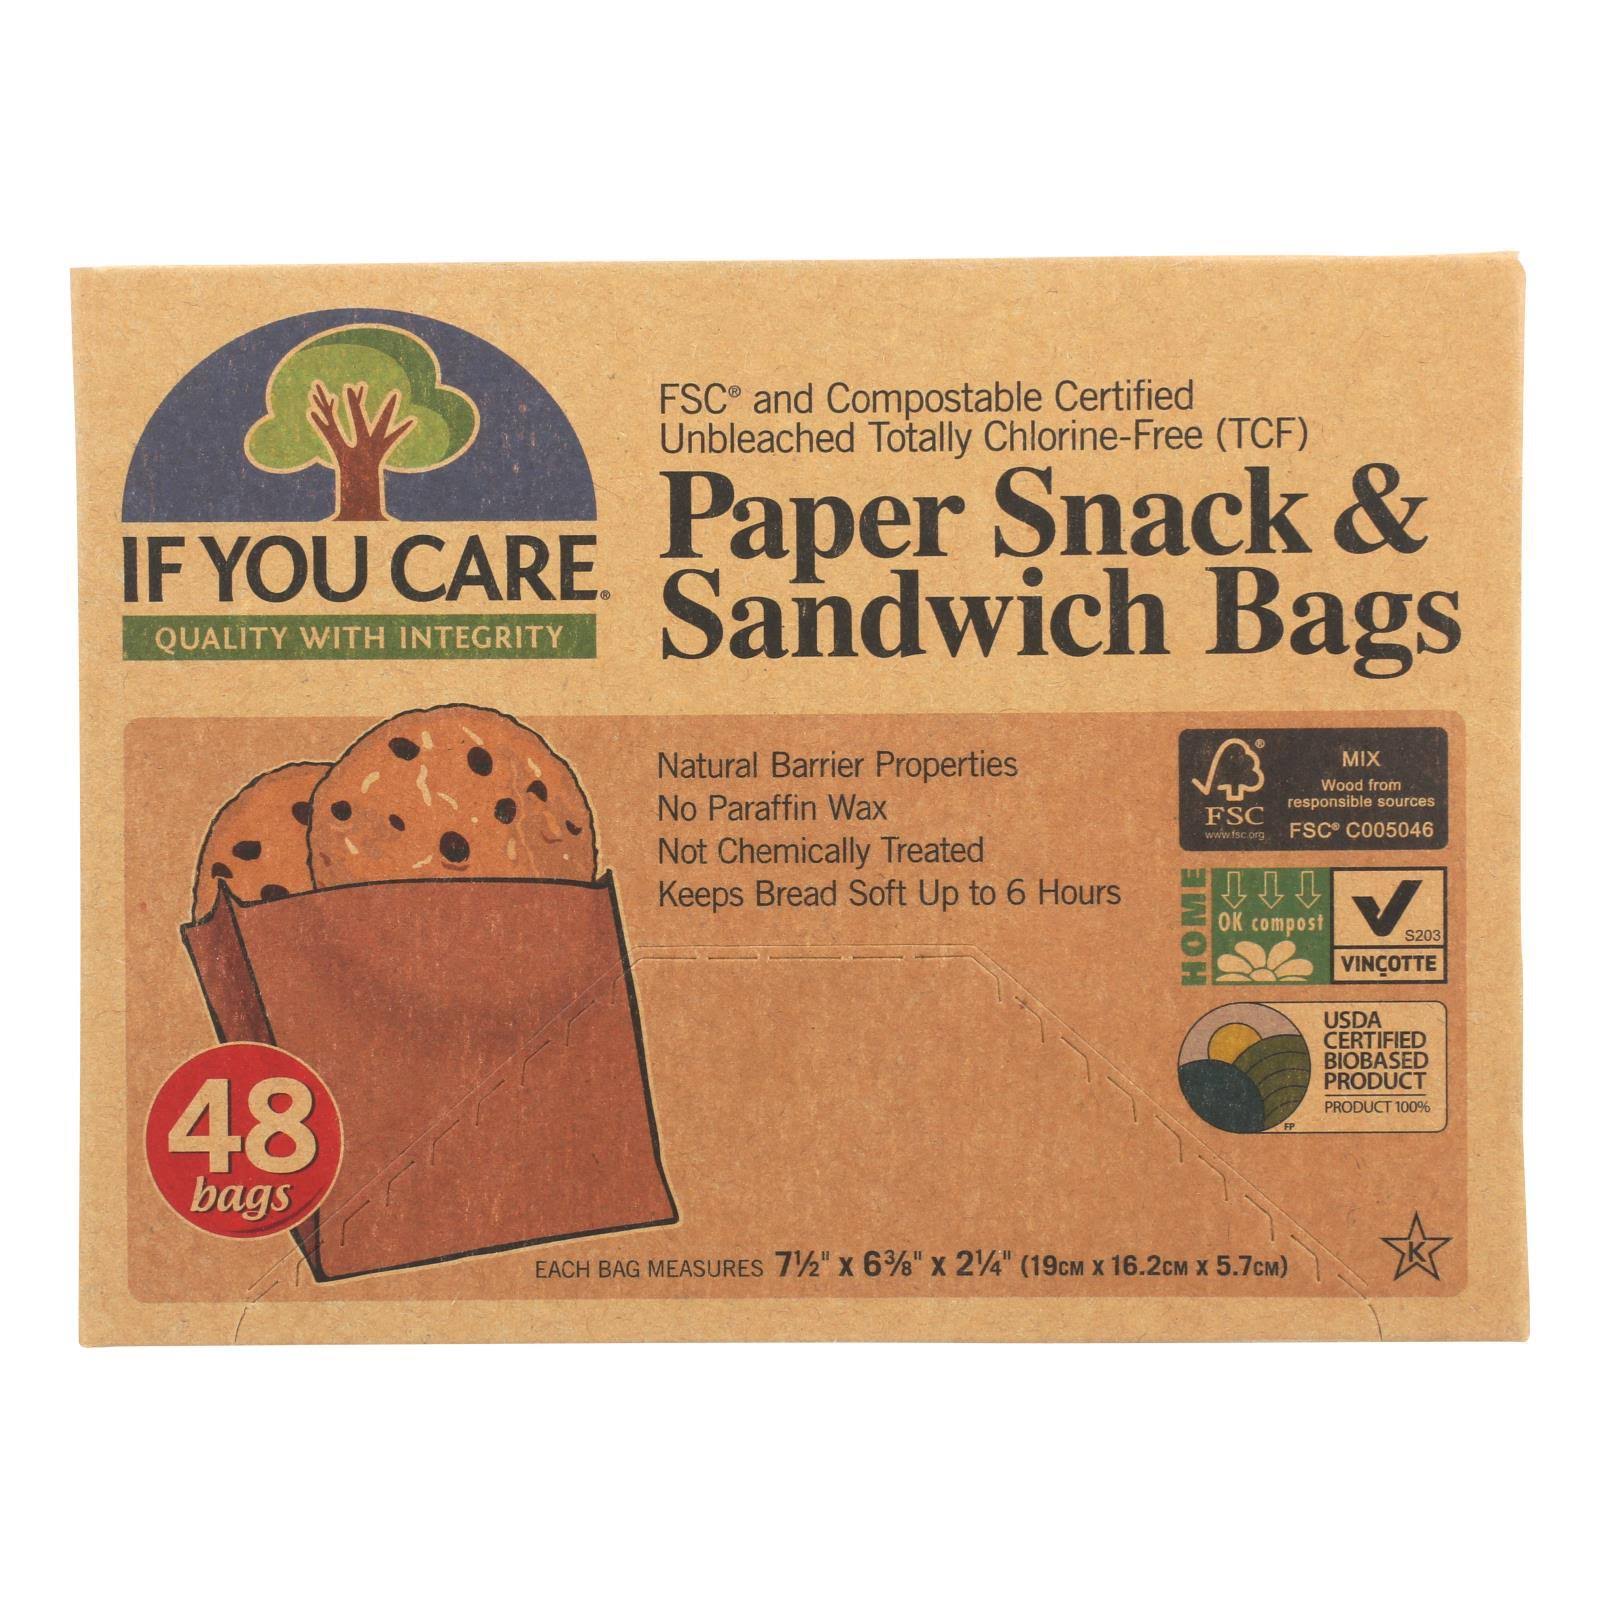 If You Care Paper Snack and Sandwich Bags - 48pcs